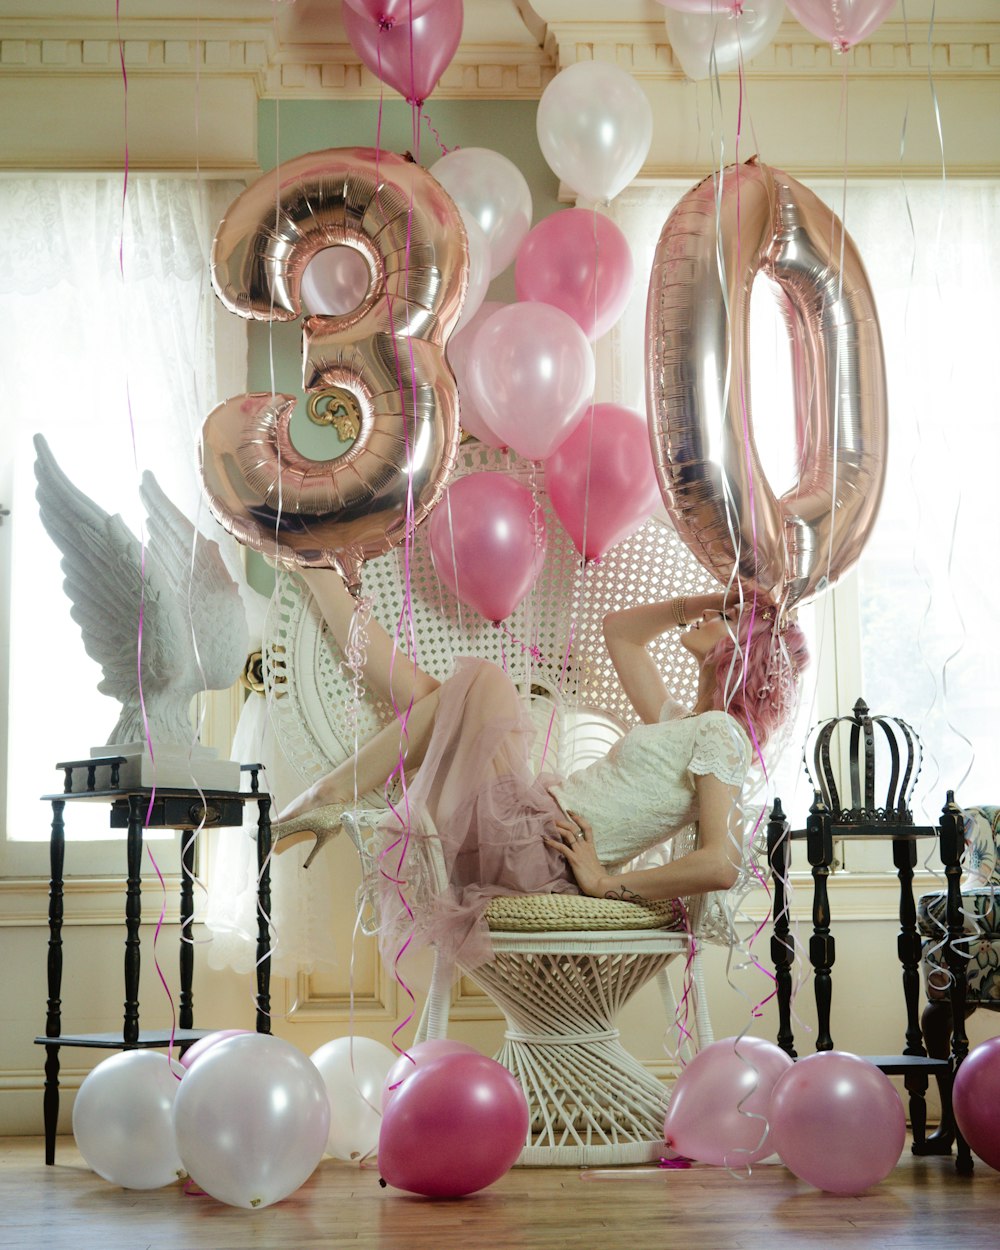 a woman laying on a chair surrounded by balloons